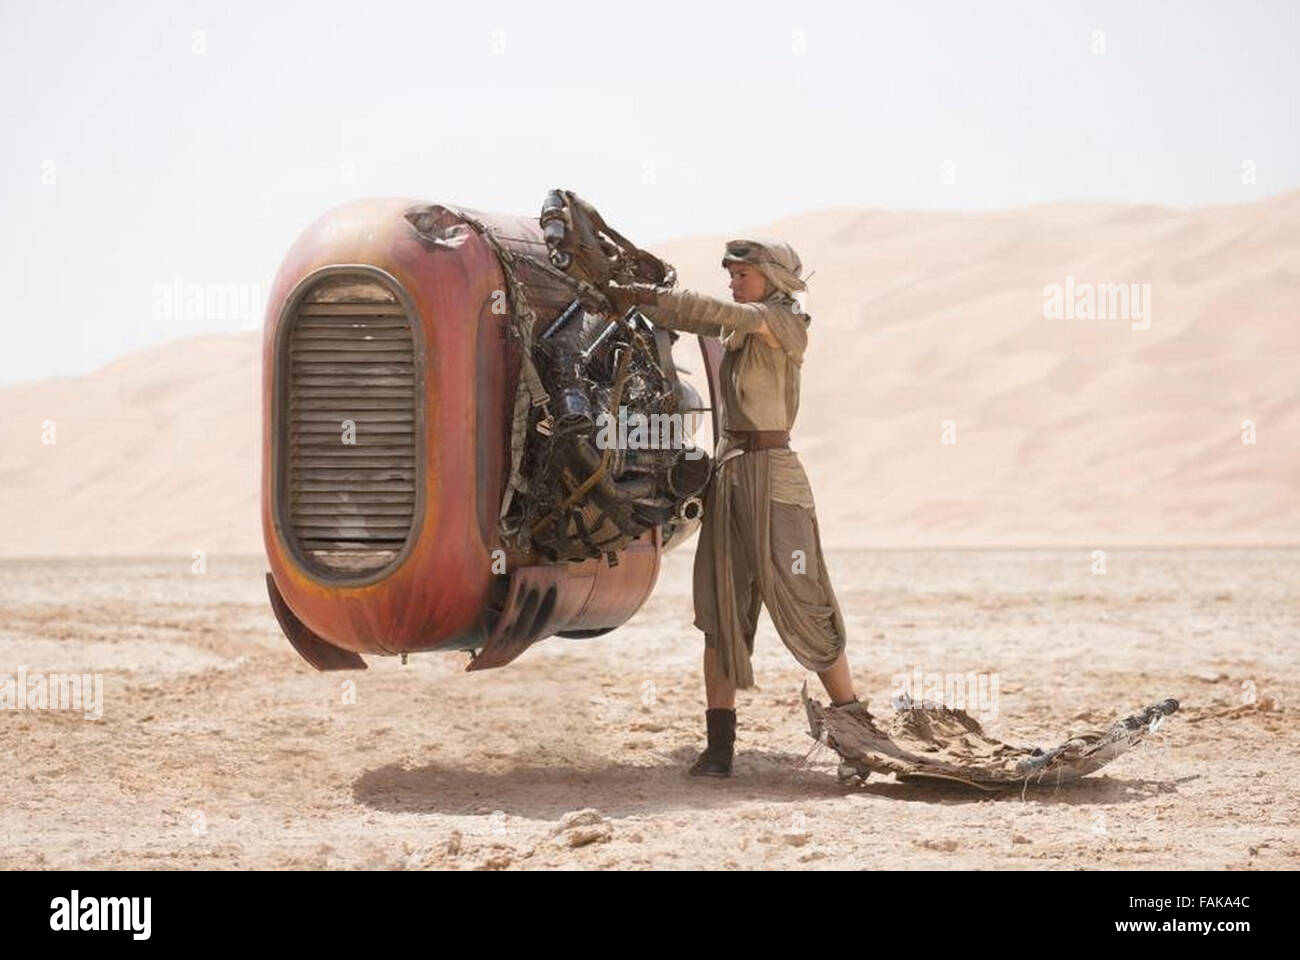 STAR WARS: THE FORCE AWAKENS 2015 Lucasfilm with Daisy Ridley Stock Photo